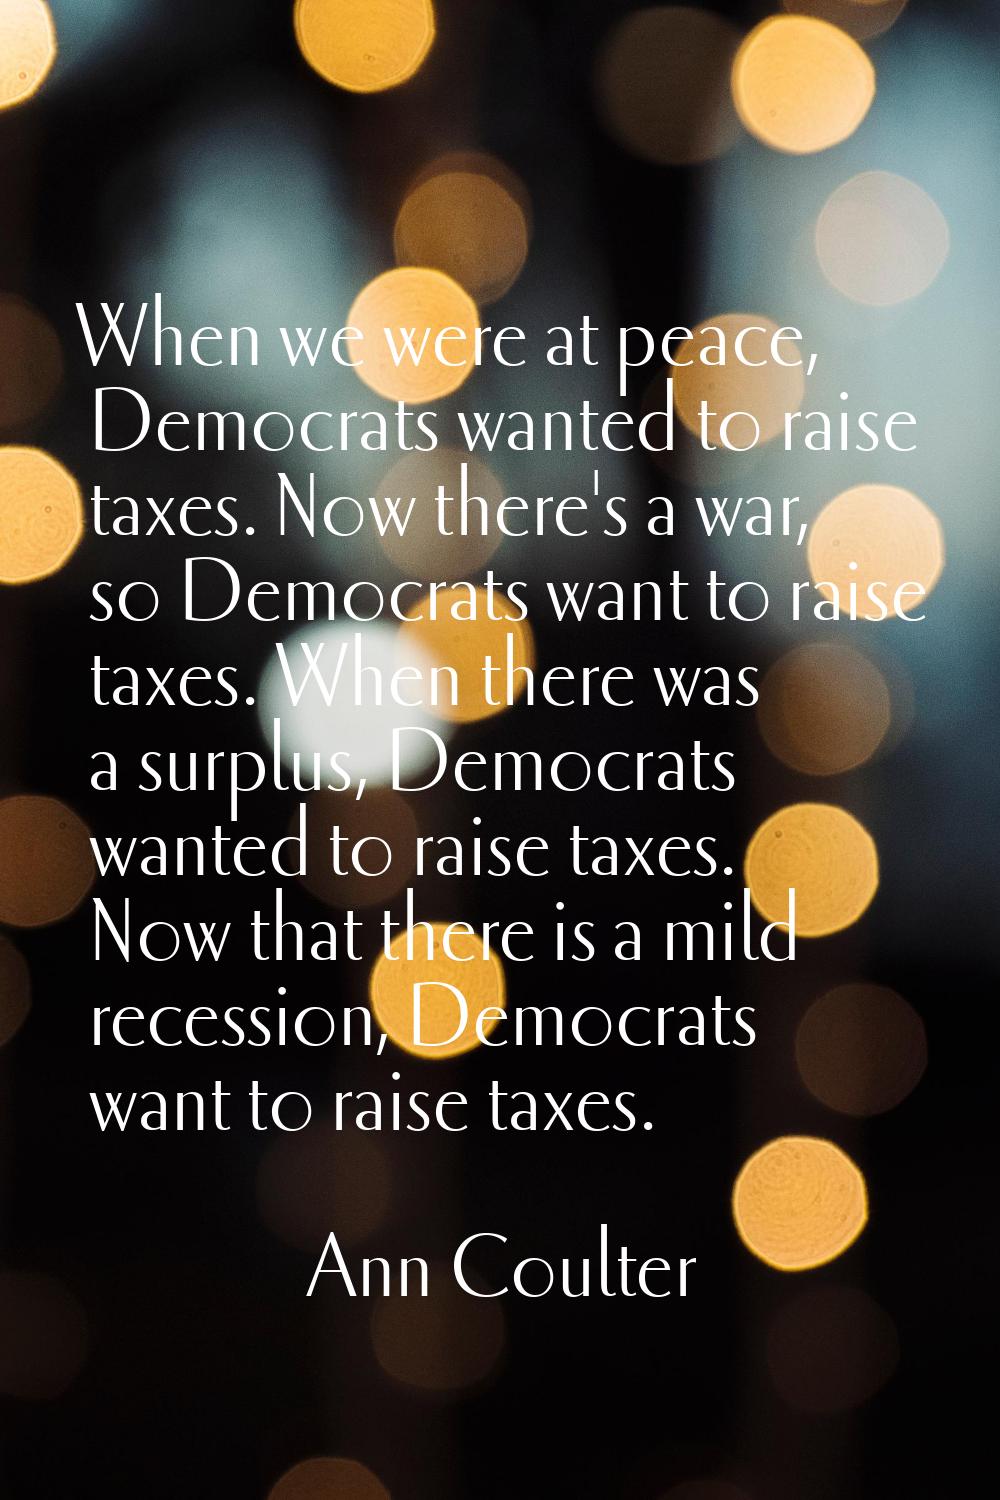 When we were at peace, Democrats wanted to raise taxes. Now there's a war, so Democrats want to rai